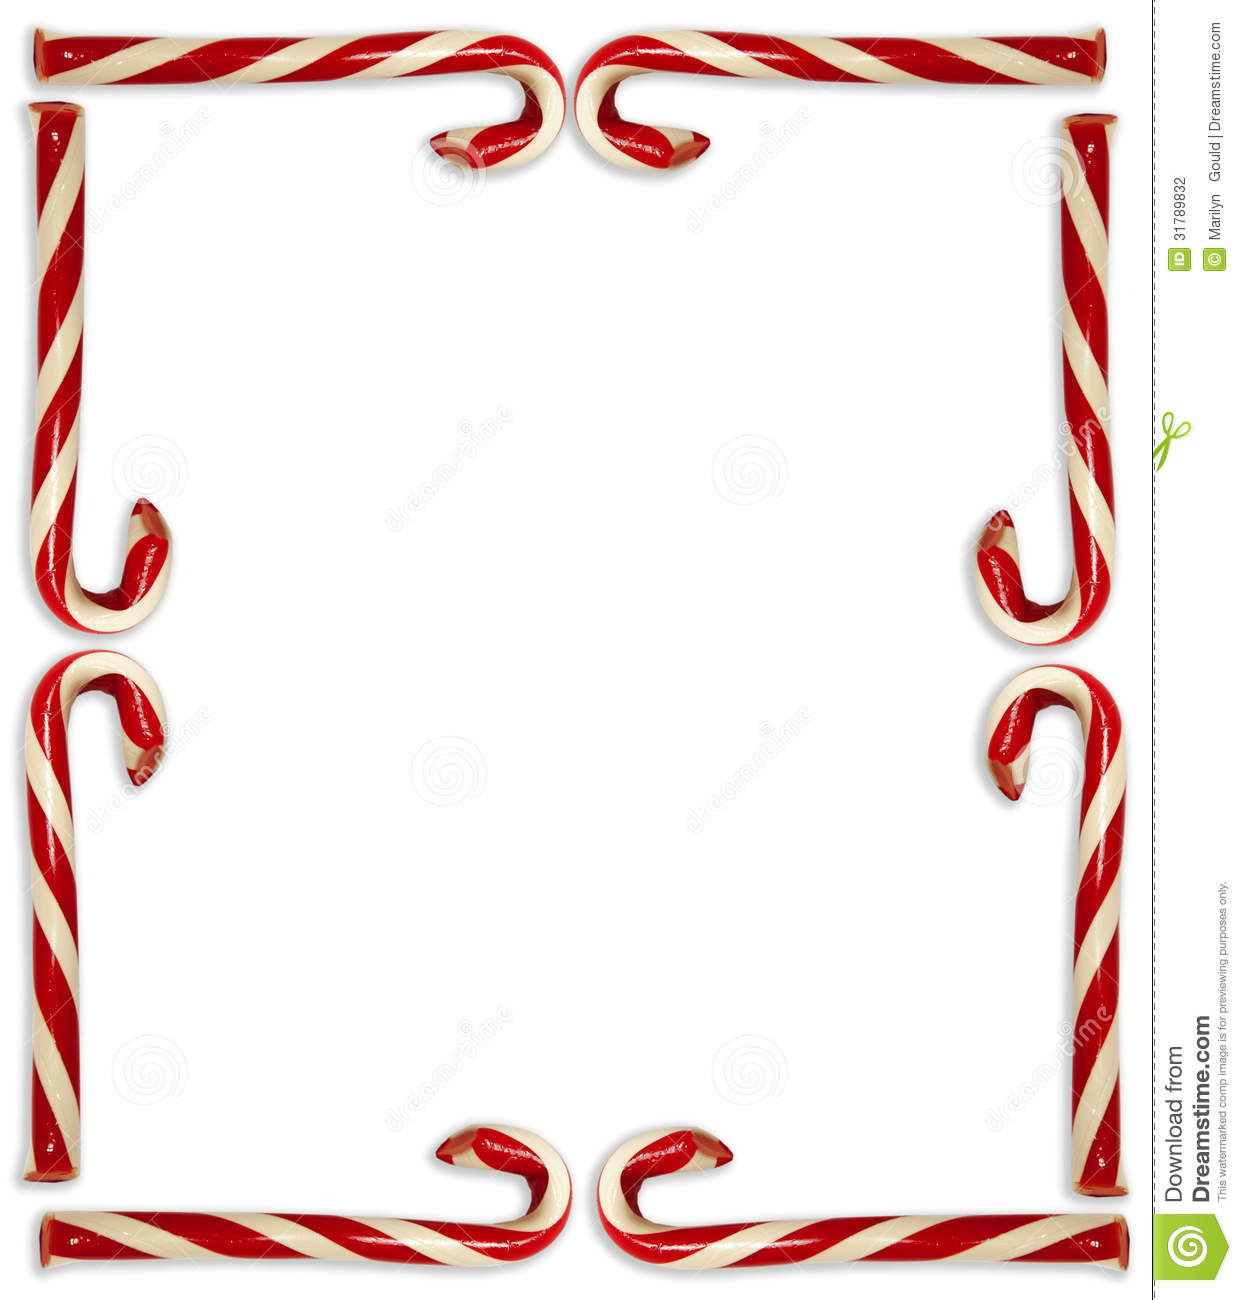 Candy Cane Border Png Vector Wallpaper Img Need